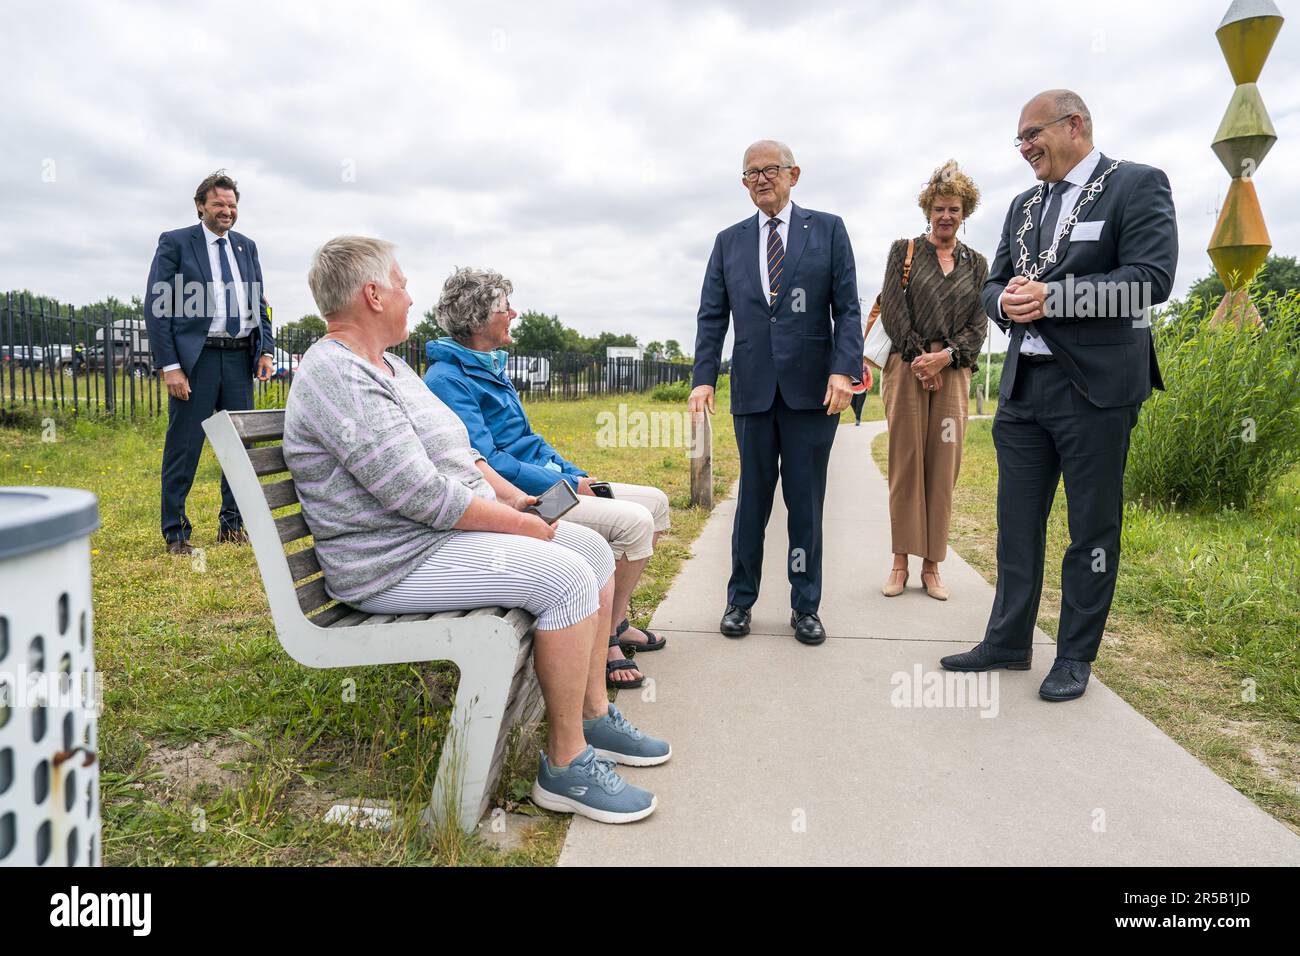 WORKENDAM - Prof. dr. mr. Pieter van Vollenhoven is received at the Biesbosch MuseumEiland. Van Vollenhoven is present at the release of a group of sturgeons in the water of National Park De Biesbosch. ANP JEROEN JUMELET netherlands out - belgium out Stock Photo